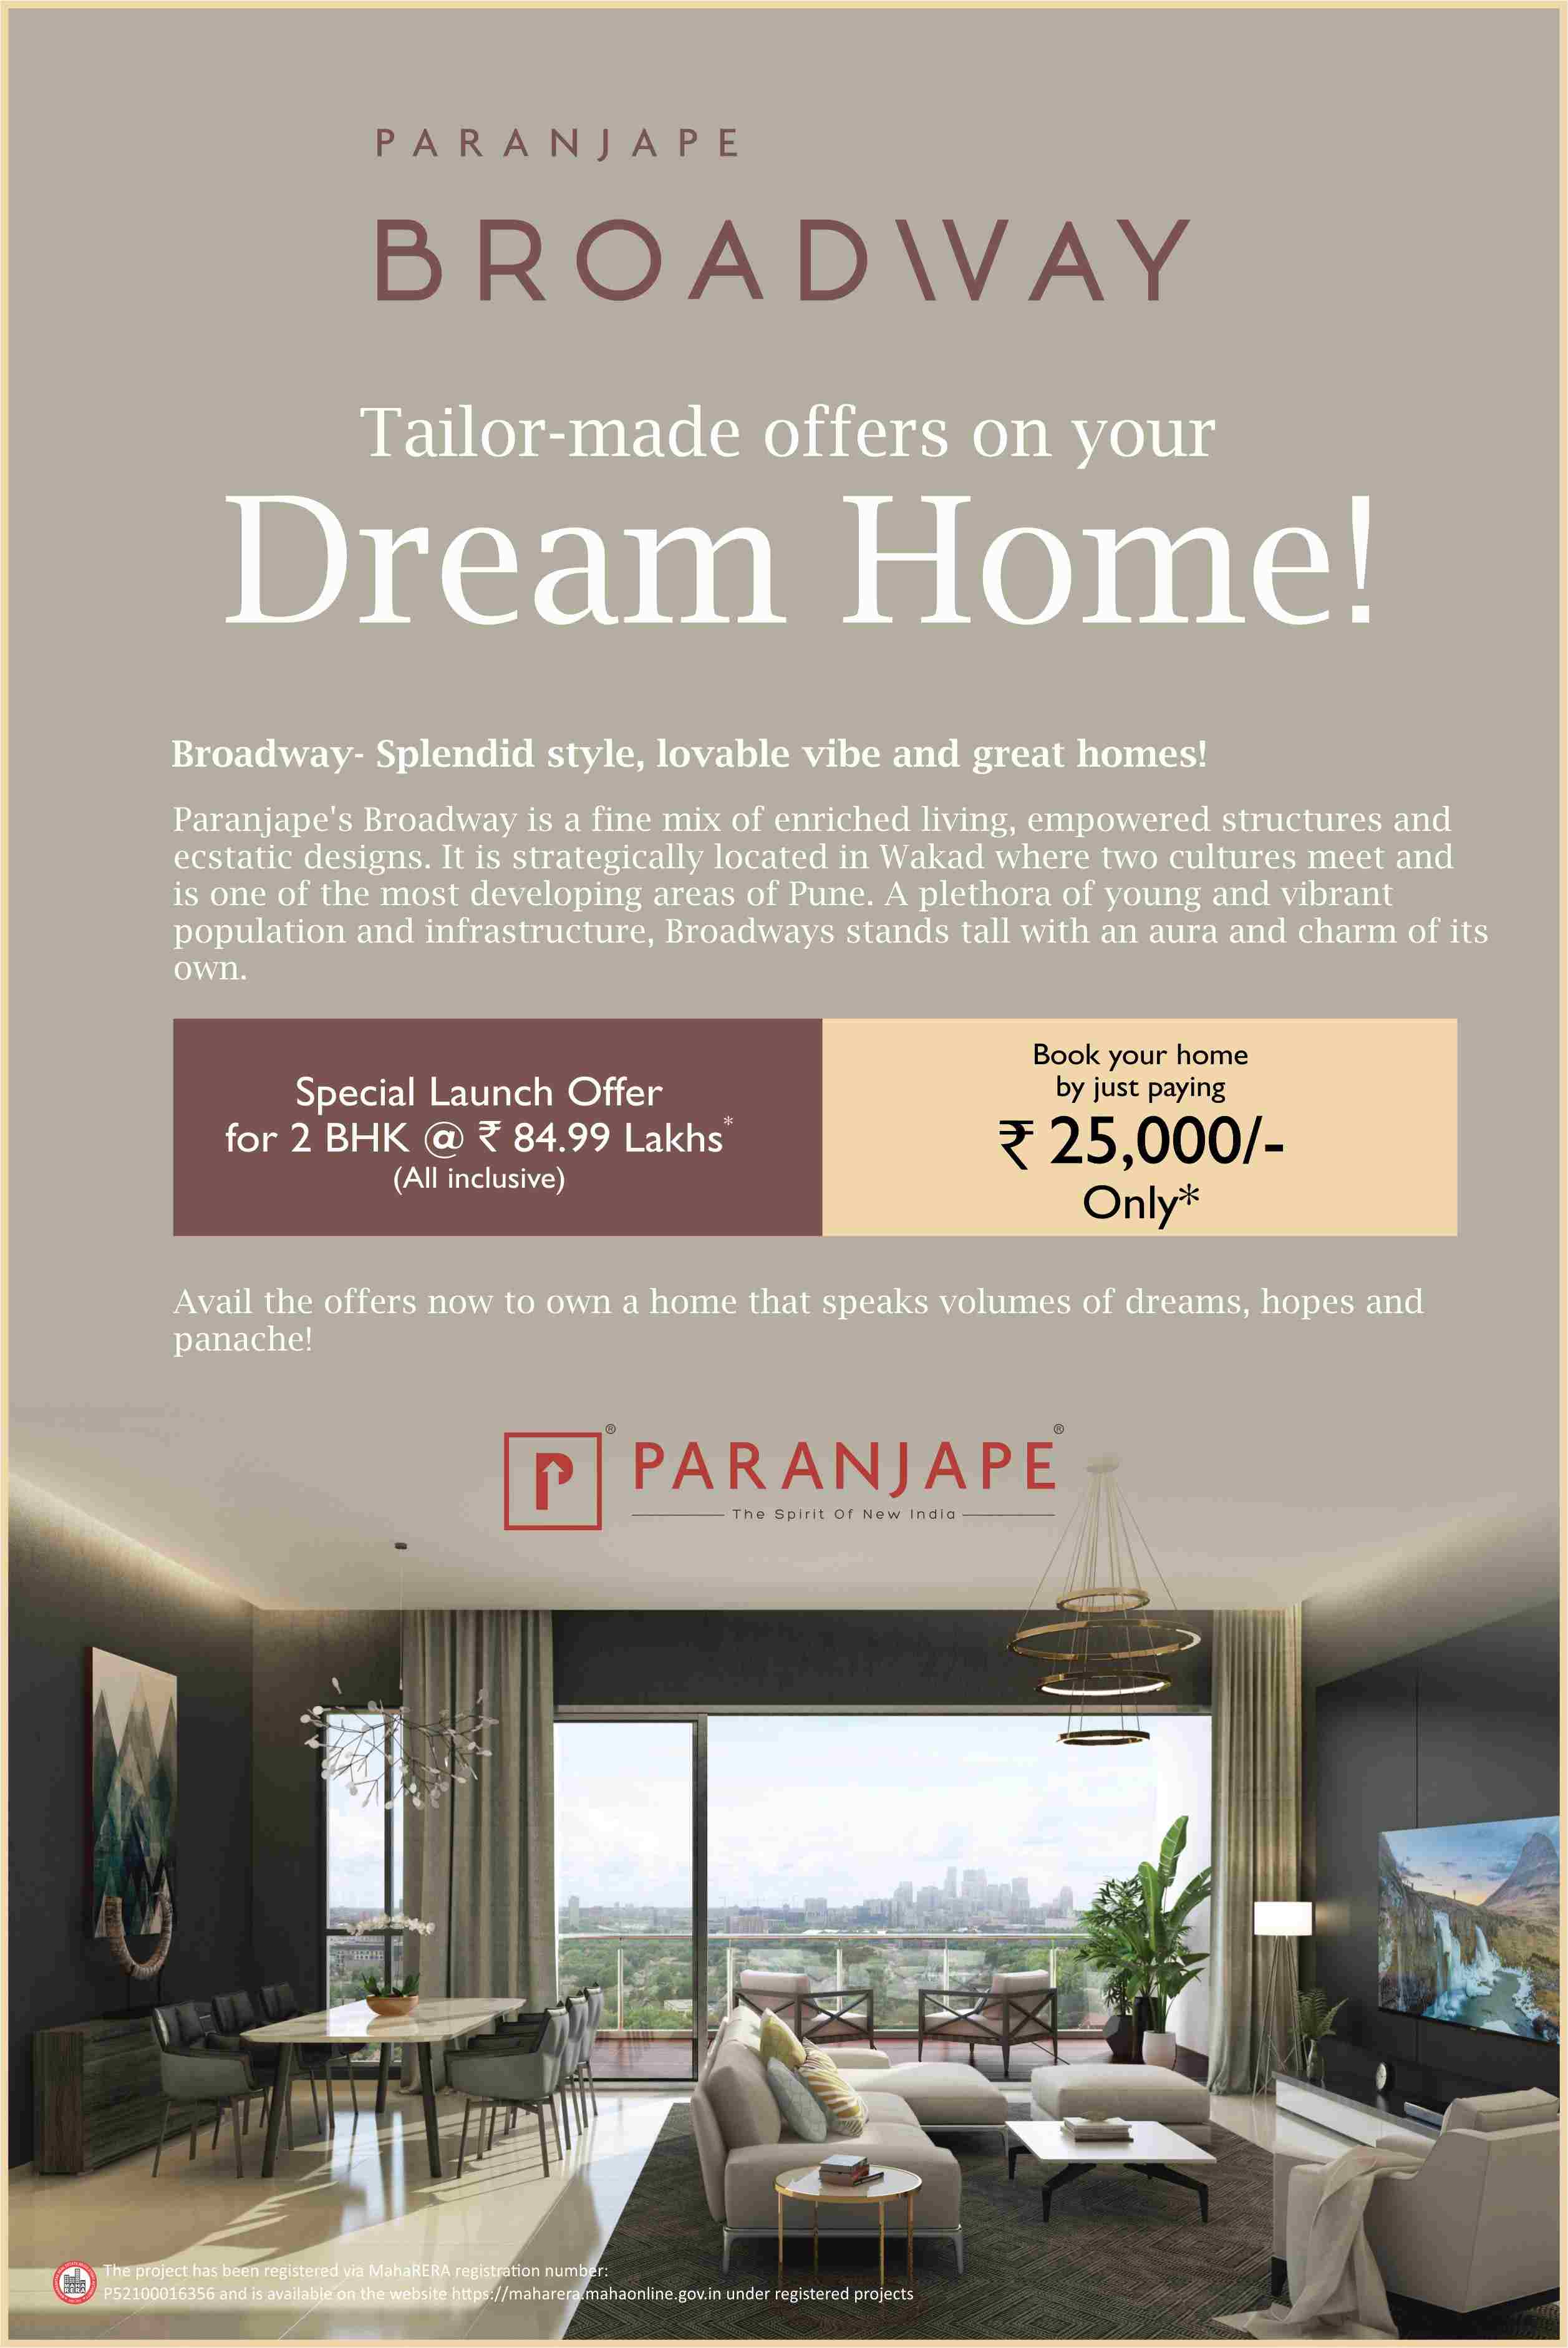 Book your home by just paying Rs 25000 at Paranjape Broadway in Wakad, Pune